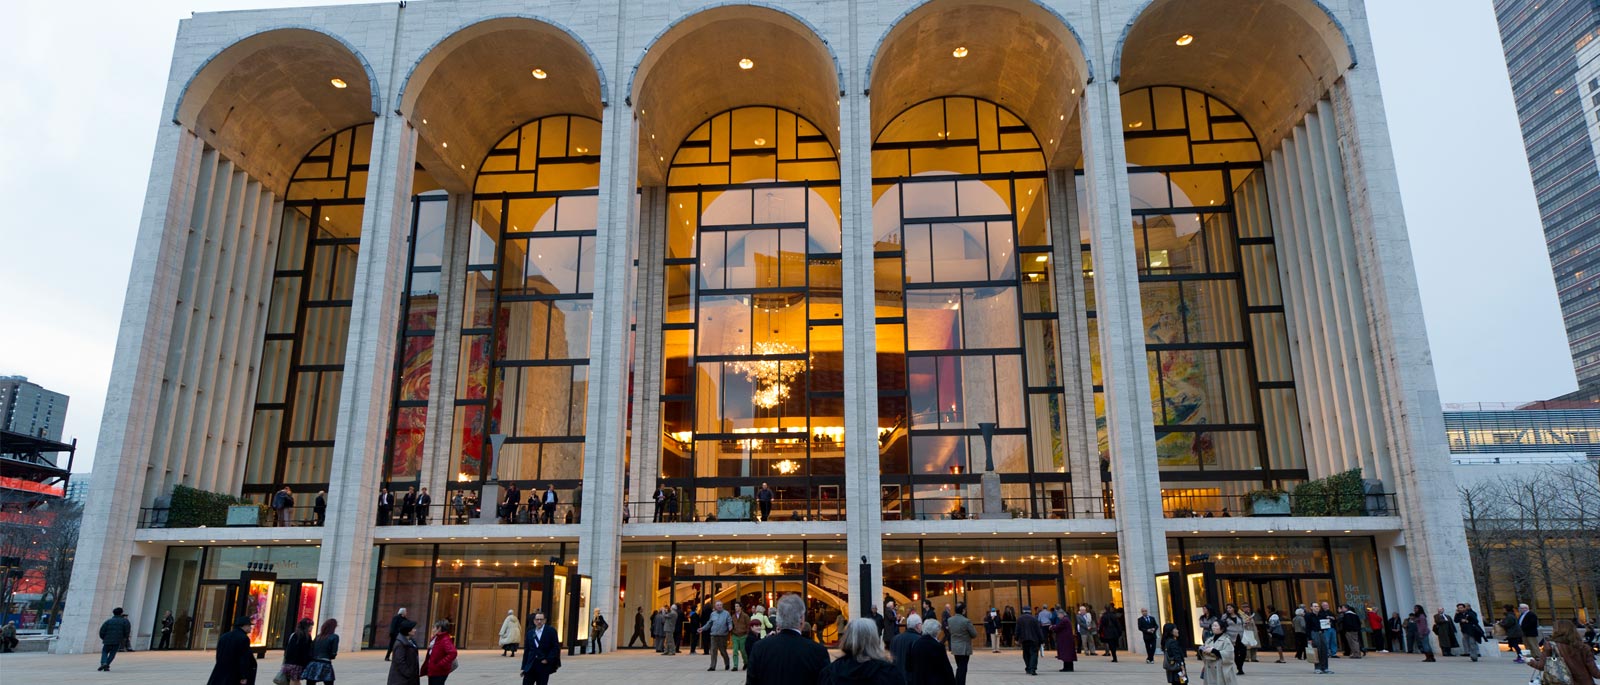 An outside view of the Met Opera house